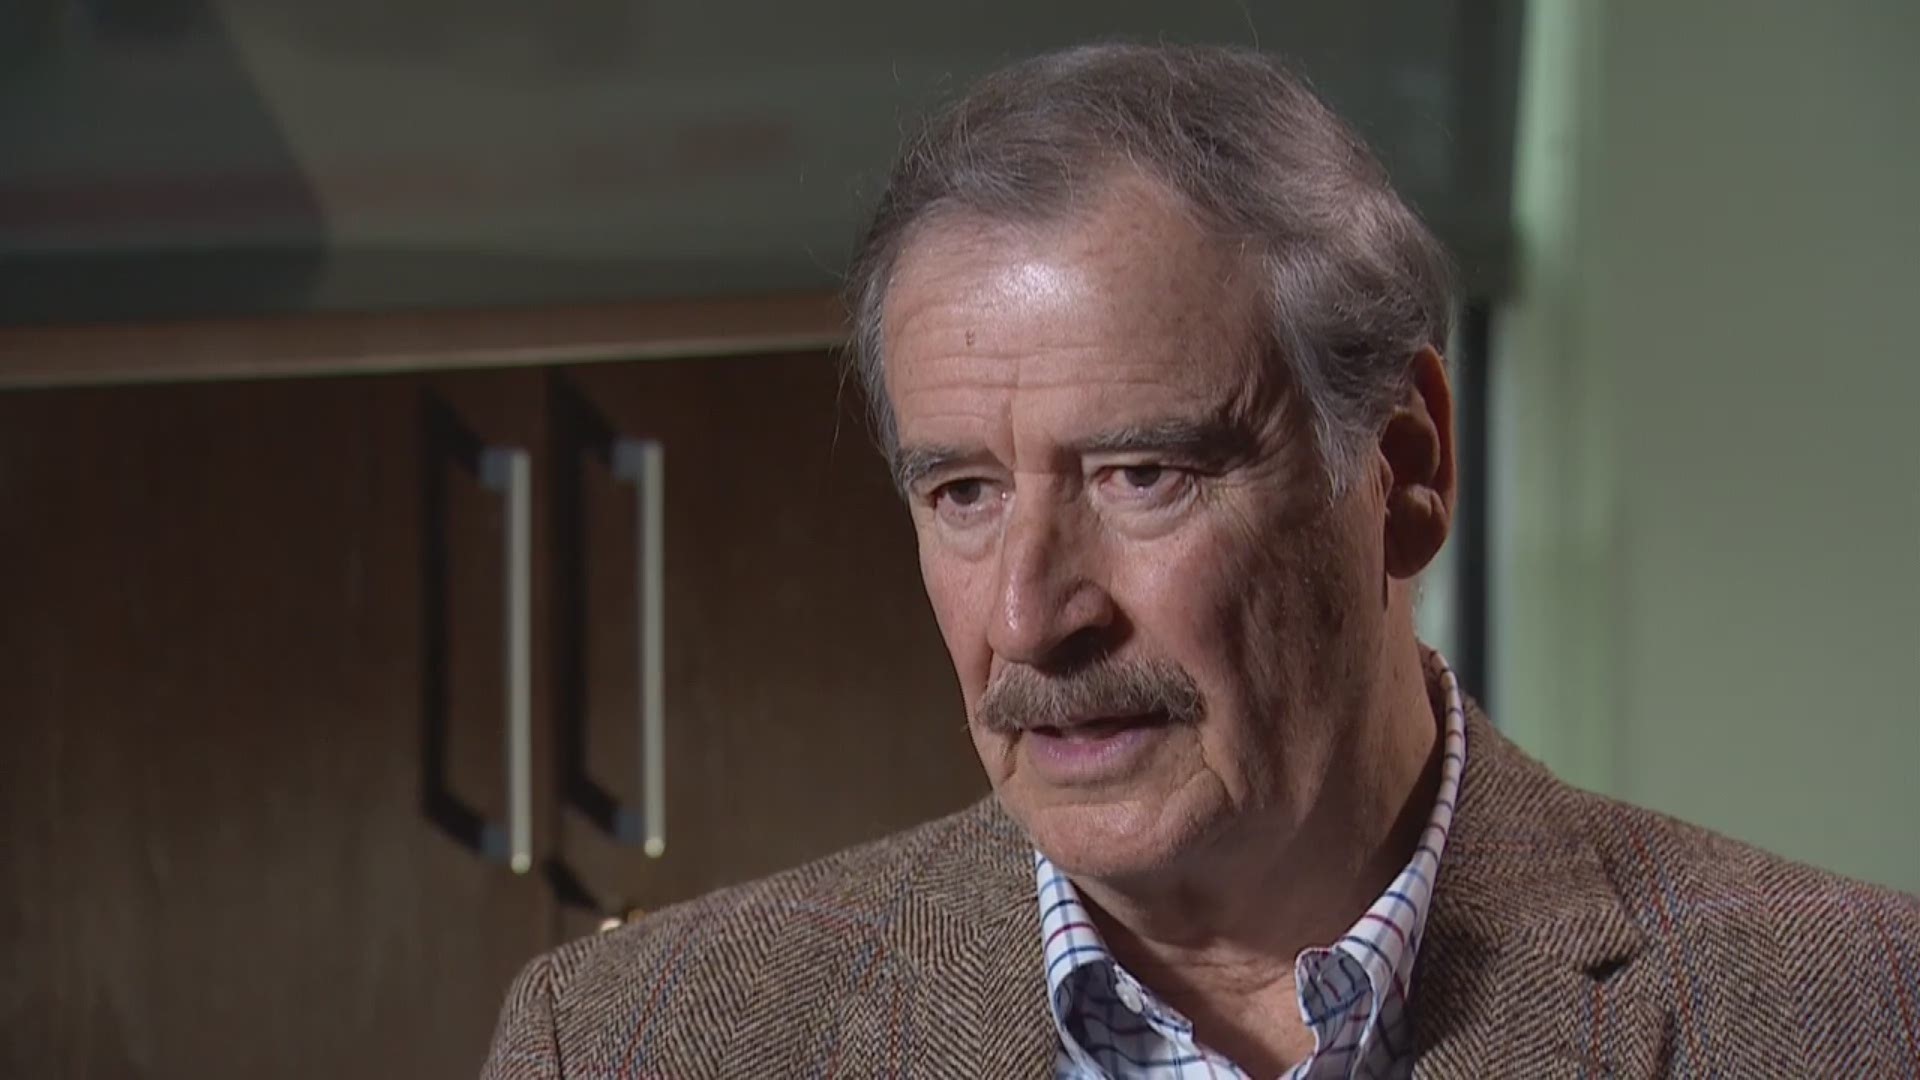 RAW: WFAA interview with Vicente Fox Part 1